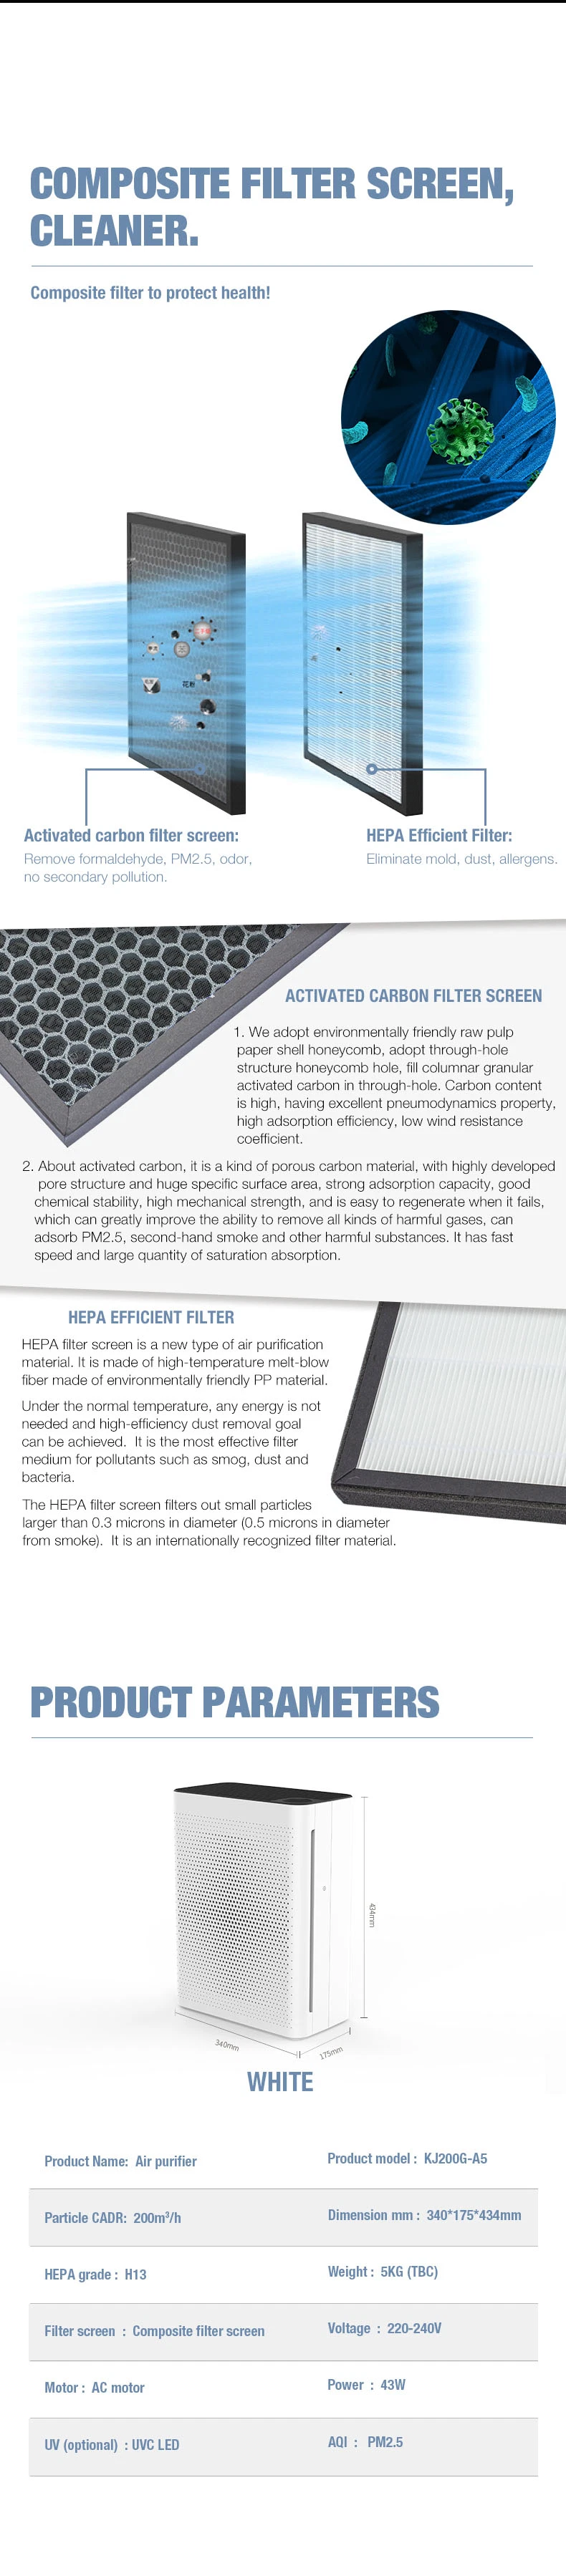 China Manufacturer of Home Air Cleaner HEPA Filter Change Air Purifier